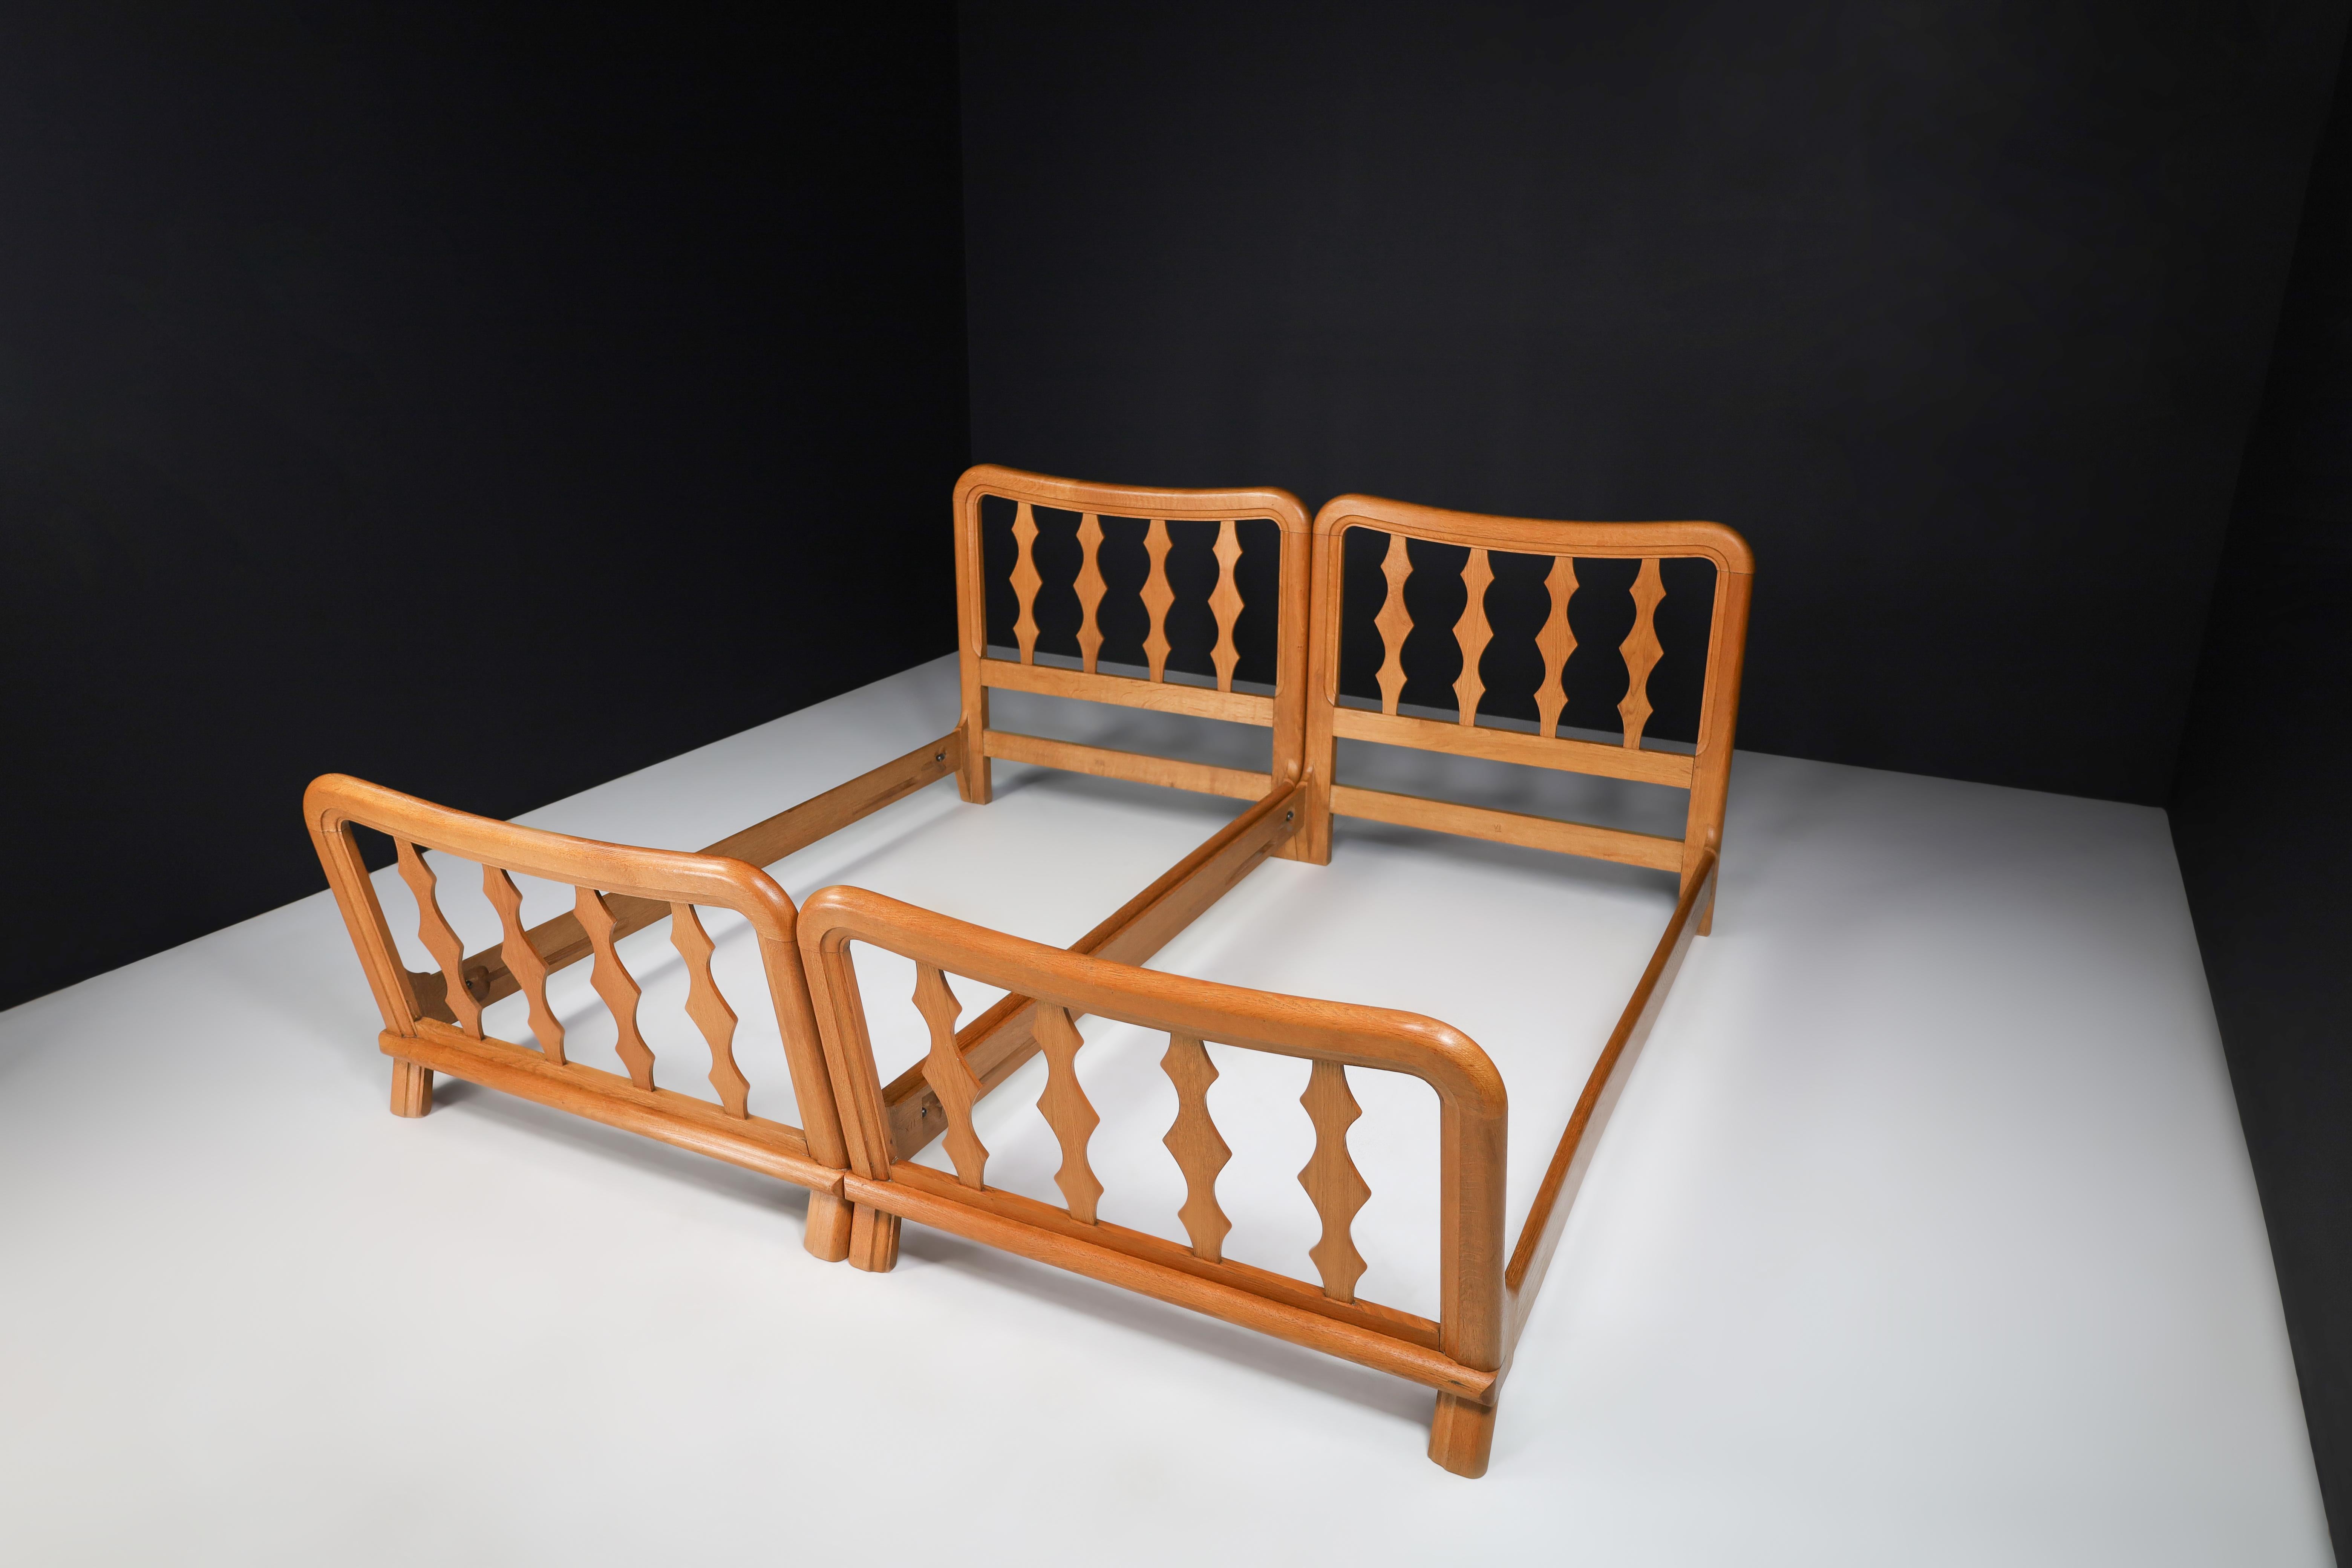 Mid-20th Century Mid-Century Modern Guillerme & Chambron Bed Frames in Blond Oak, France 1960s For Sale